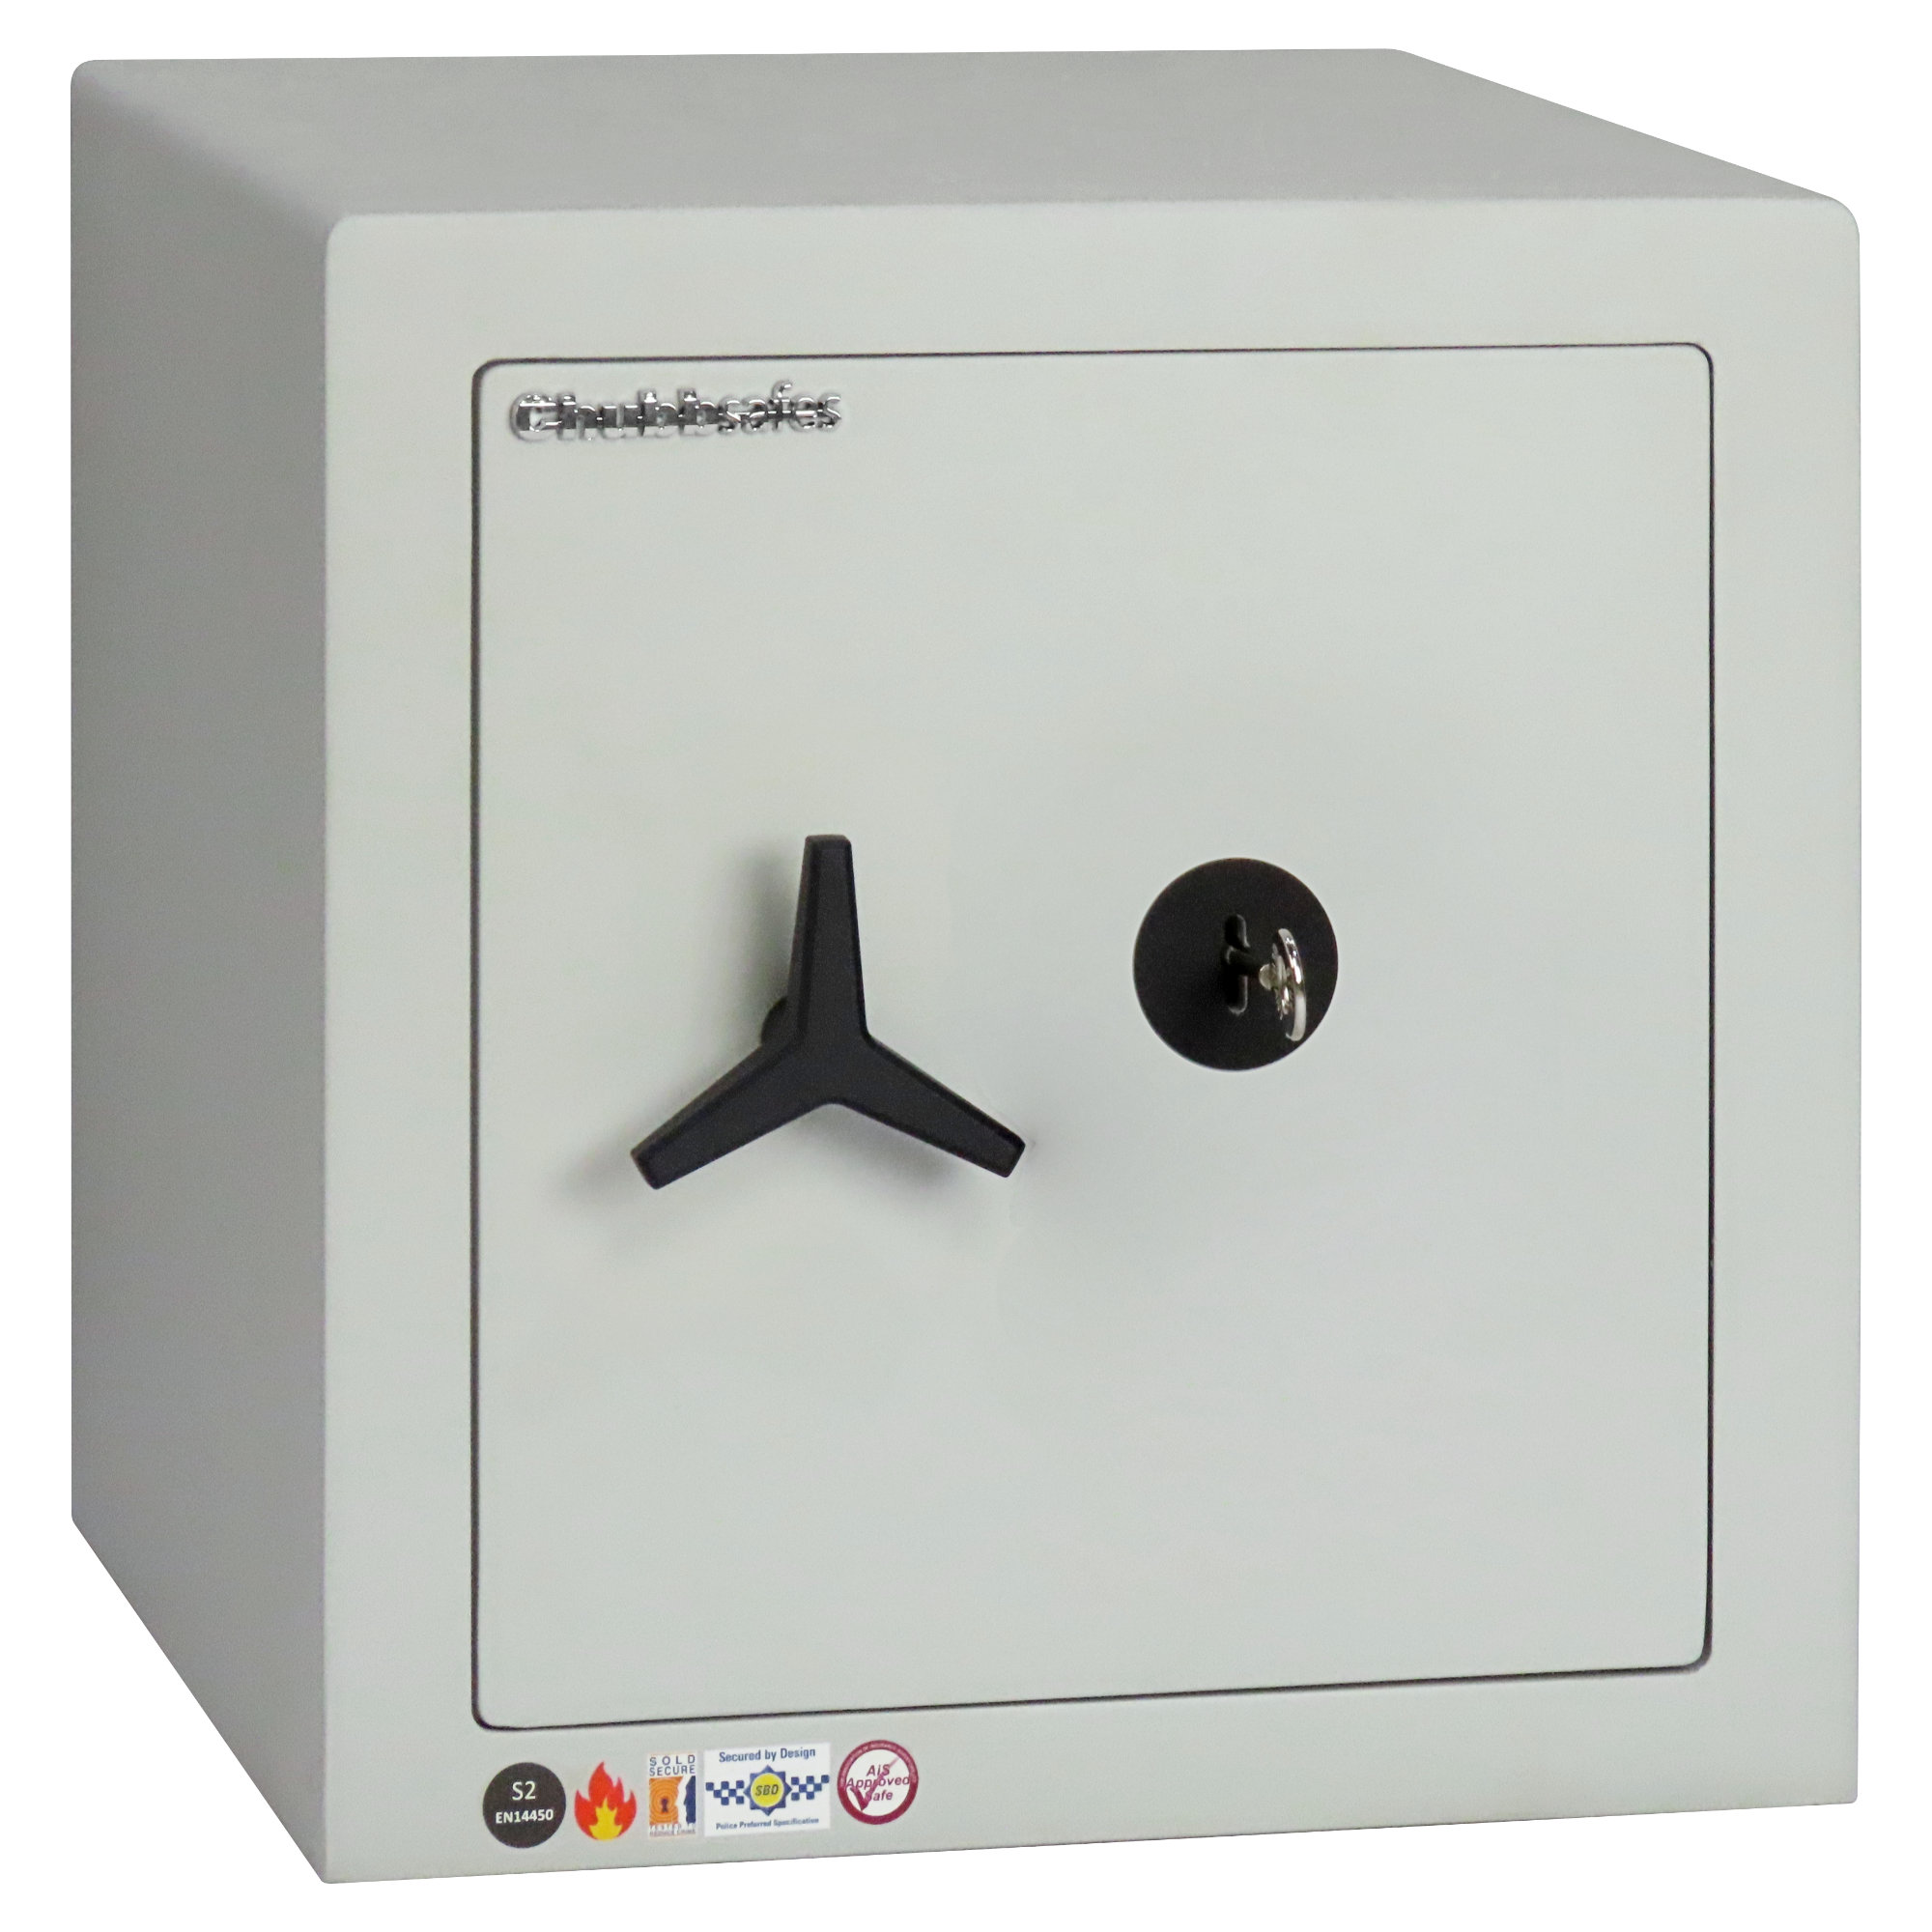 This Chubbsafes HomeVault S2 Plus 40KL is a security safe for the home or durable office safe that comes with one height adjustable shelf, USB rechargeable light and furnished with a good quality key retaining key lock. The safe is the middle of 3 sizes and is almost 15 inch square and finished in a cream high quality paint.